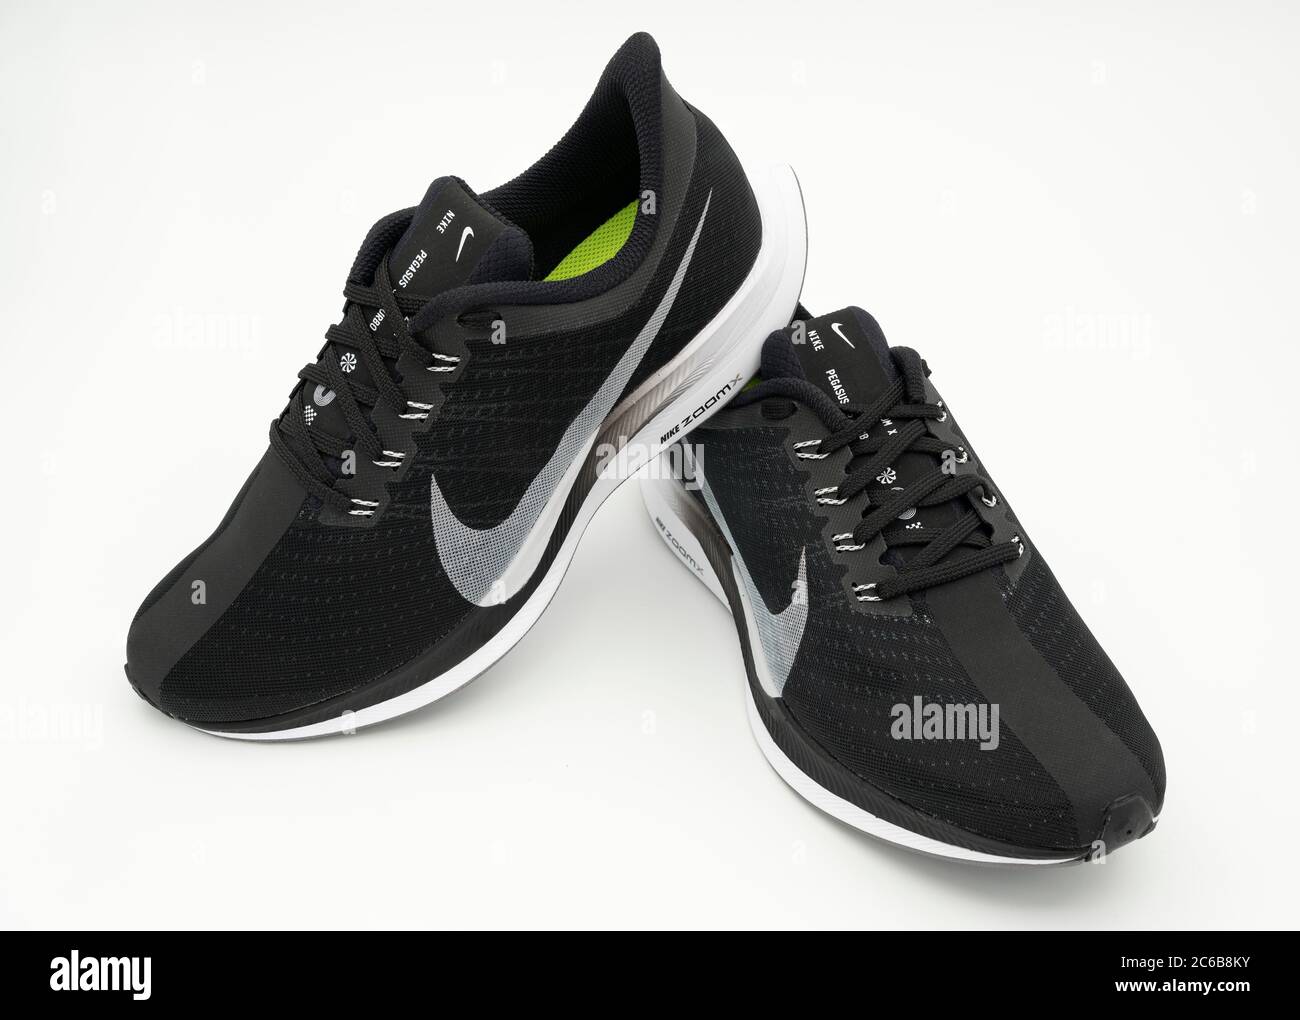 Pair of black Nike Pegasus Turbo running shoes cut out isolated on ...